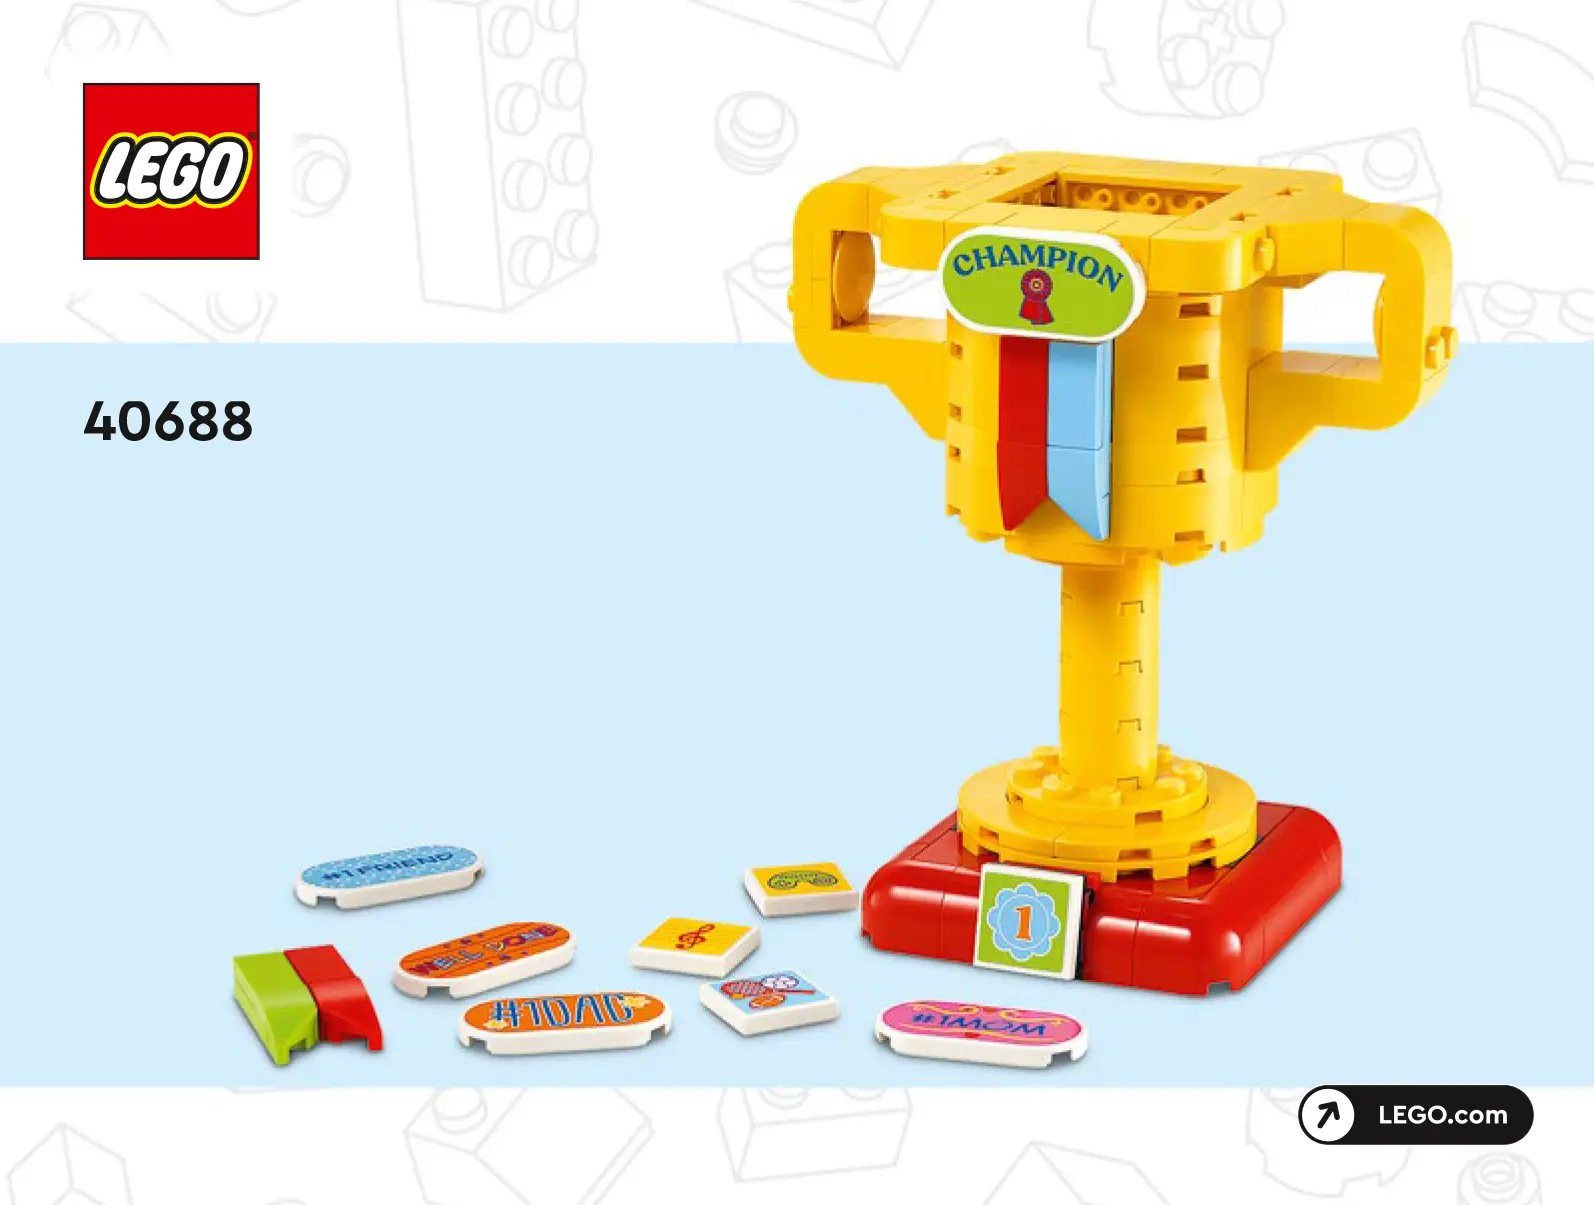 Check Out the 'Trophy (40688)' - The New LEGO(R) GWP Set You'll Love to Receive